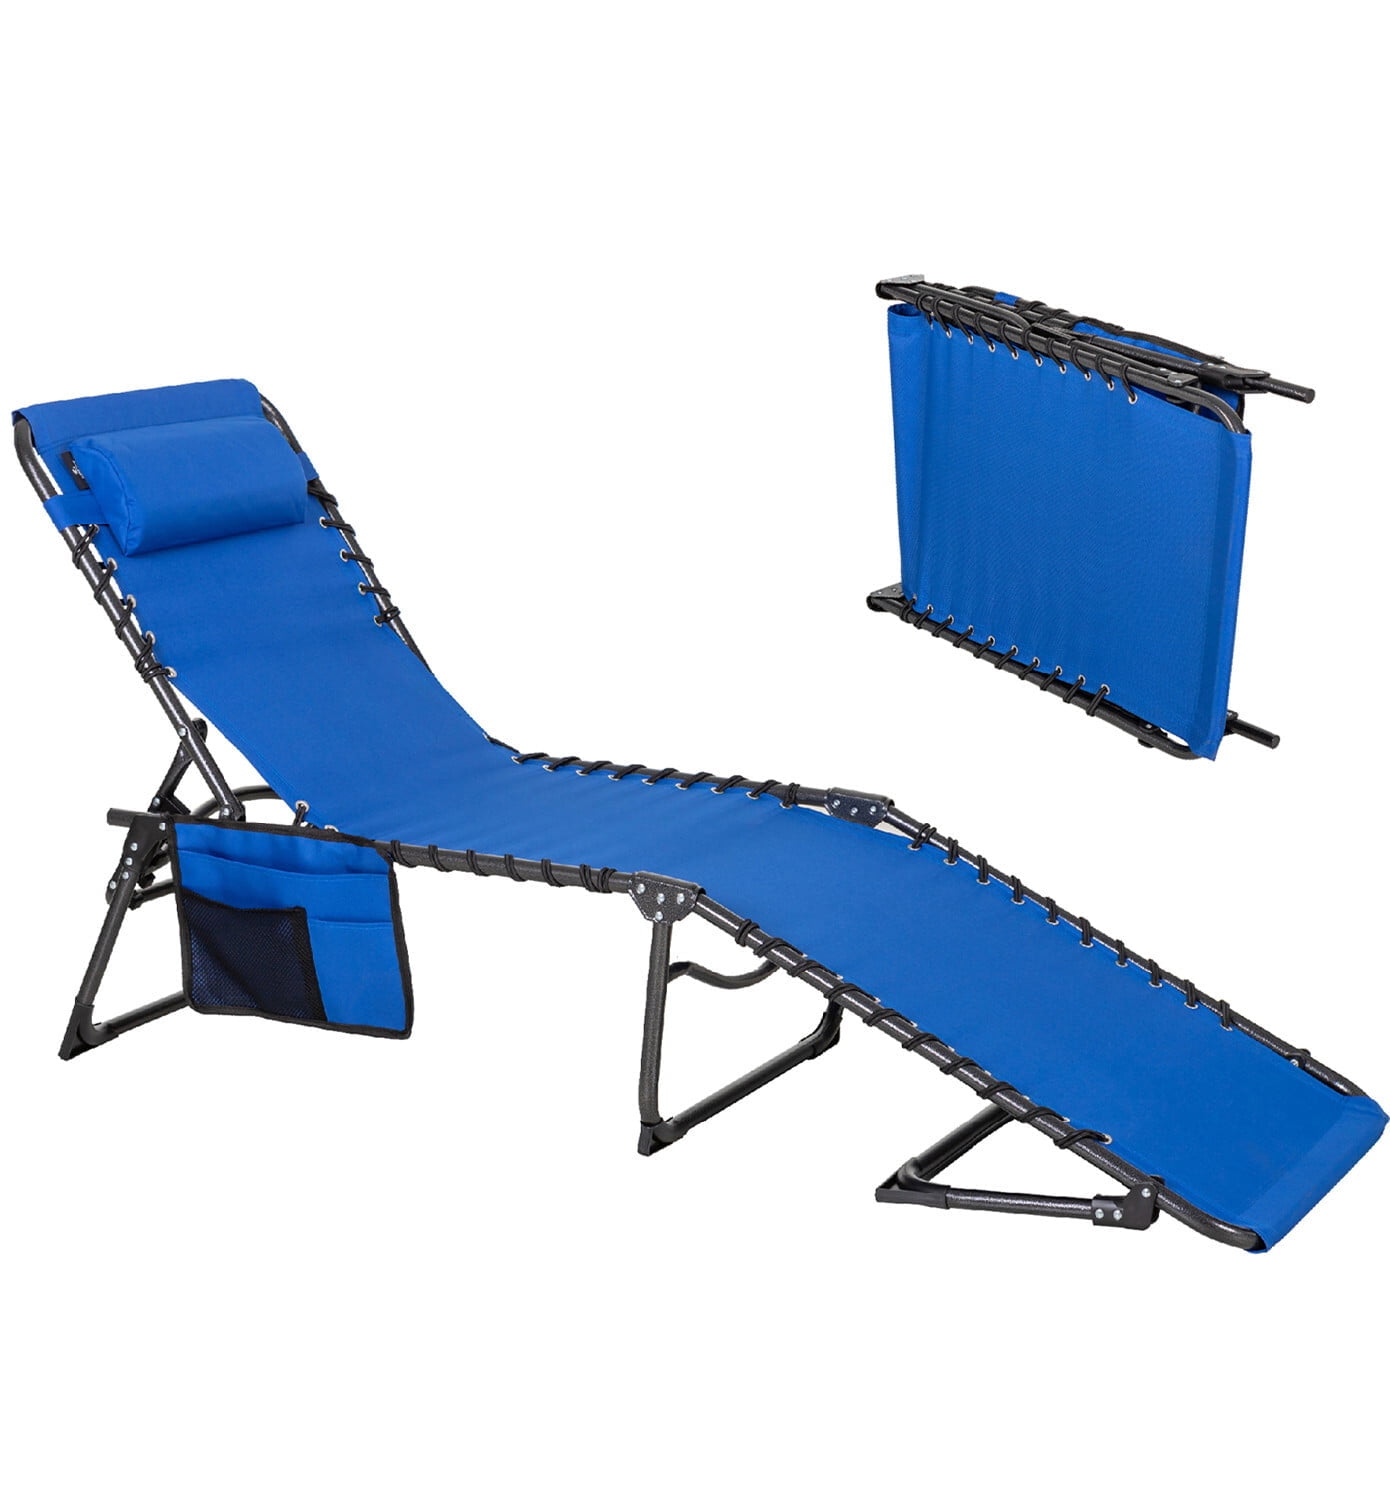 Alpha Camper Folding Chair with W/Pillow & 5 Position Adjustable Backrest for Patio, Camping, and Poolside, Blue - image 1 of 10